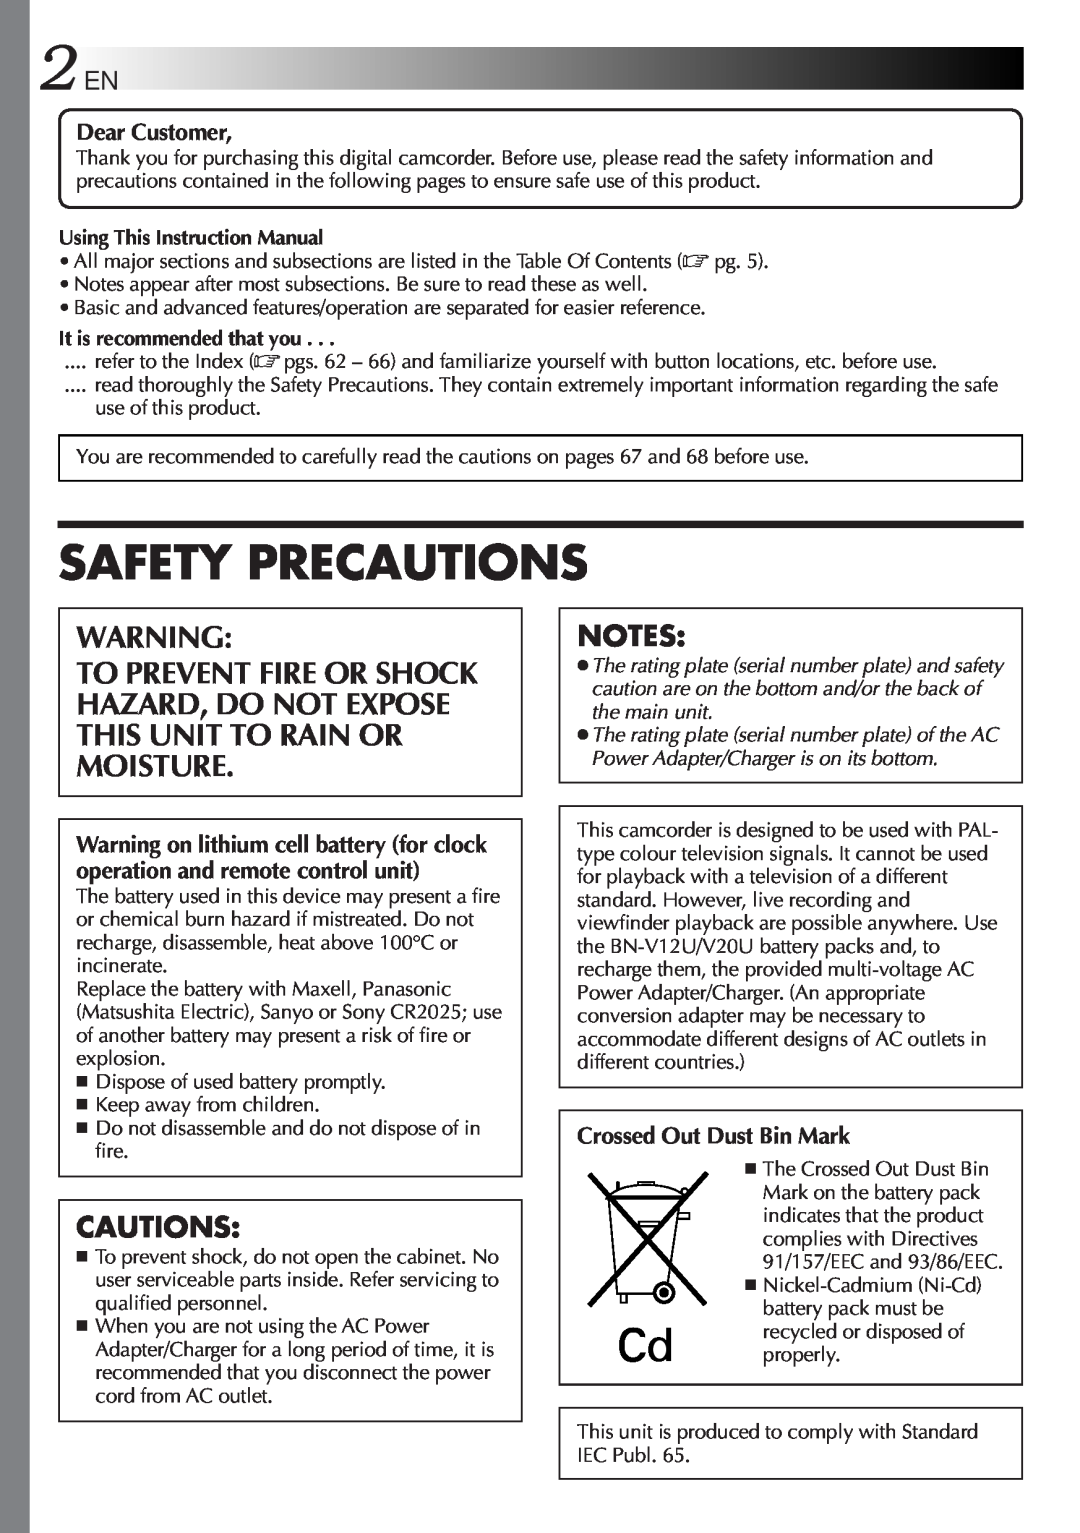 JVC LYT0242-001A manual Cautions, Safety Precautions, Dear Customer, Crossed Out Dust Bin Mark 